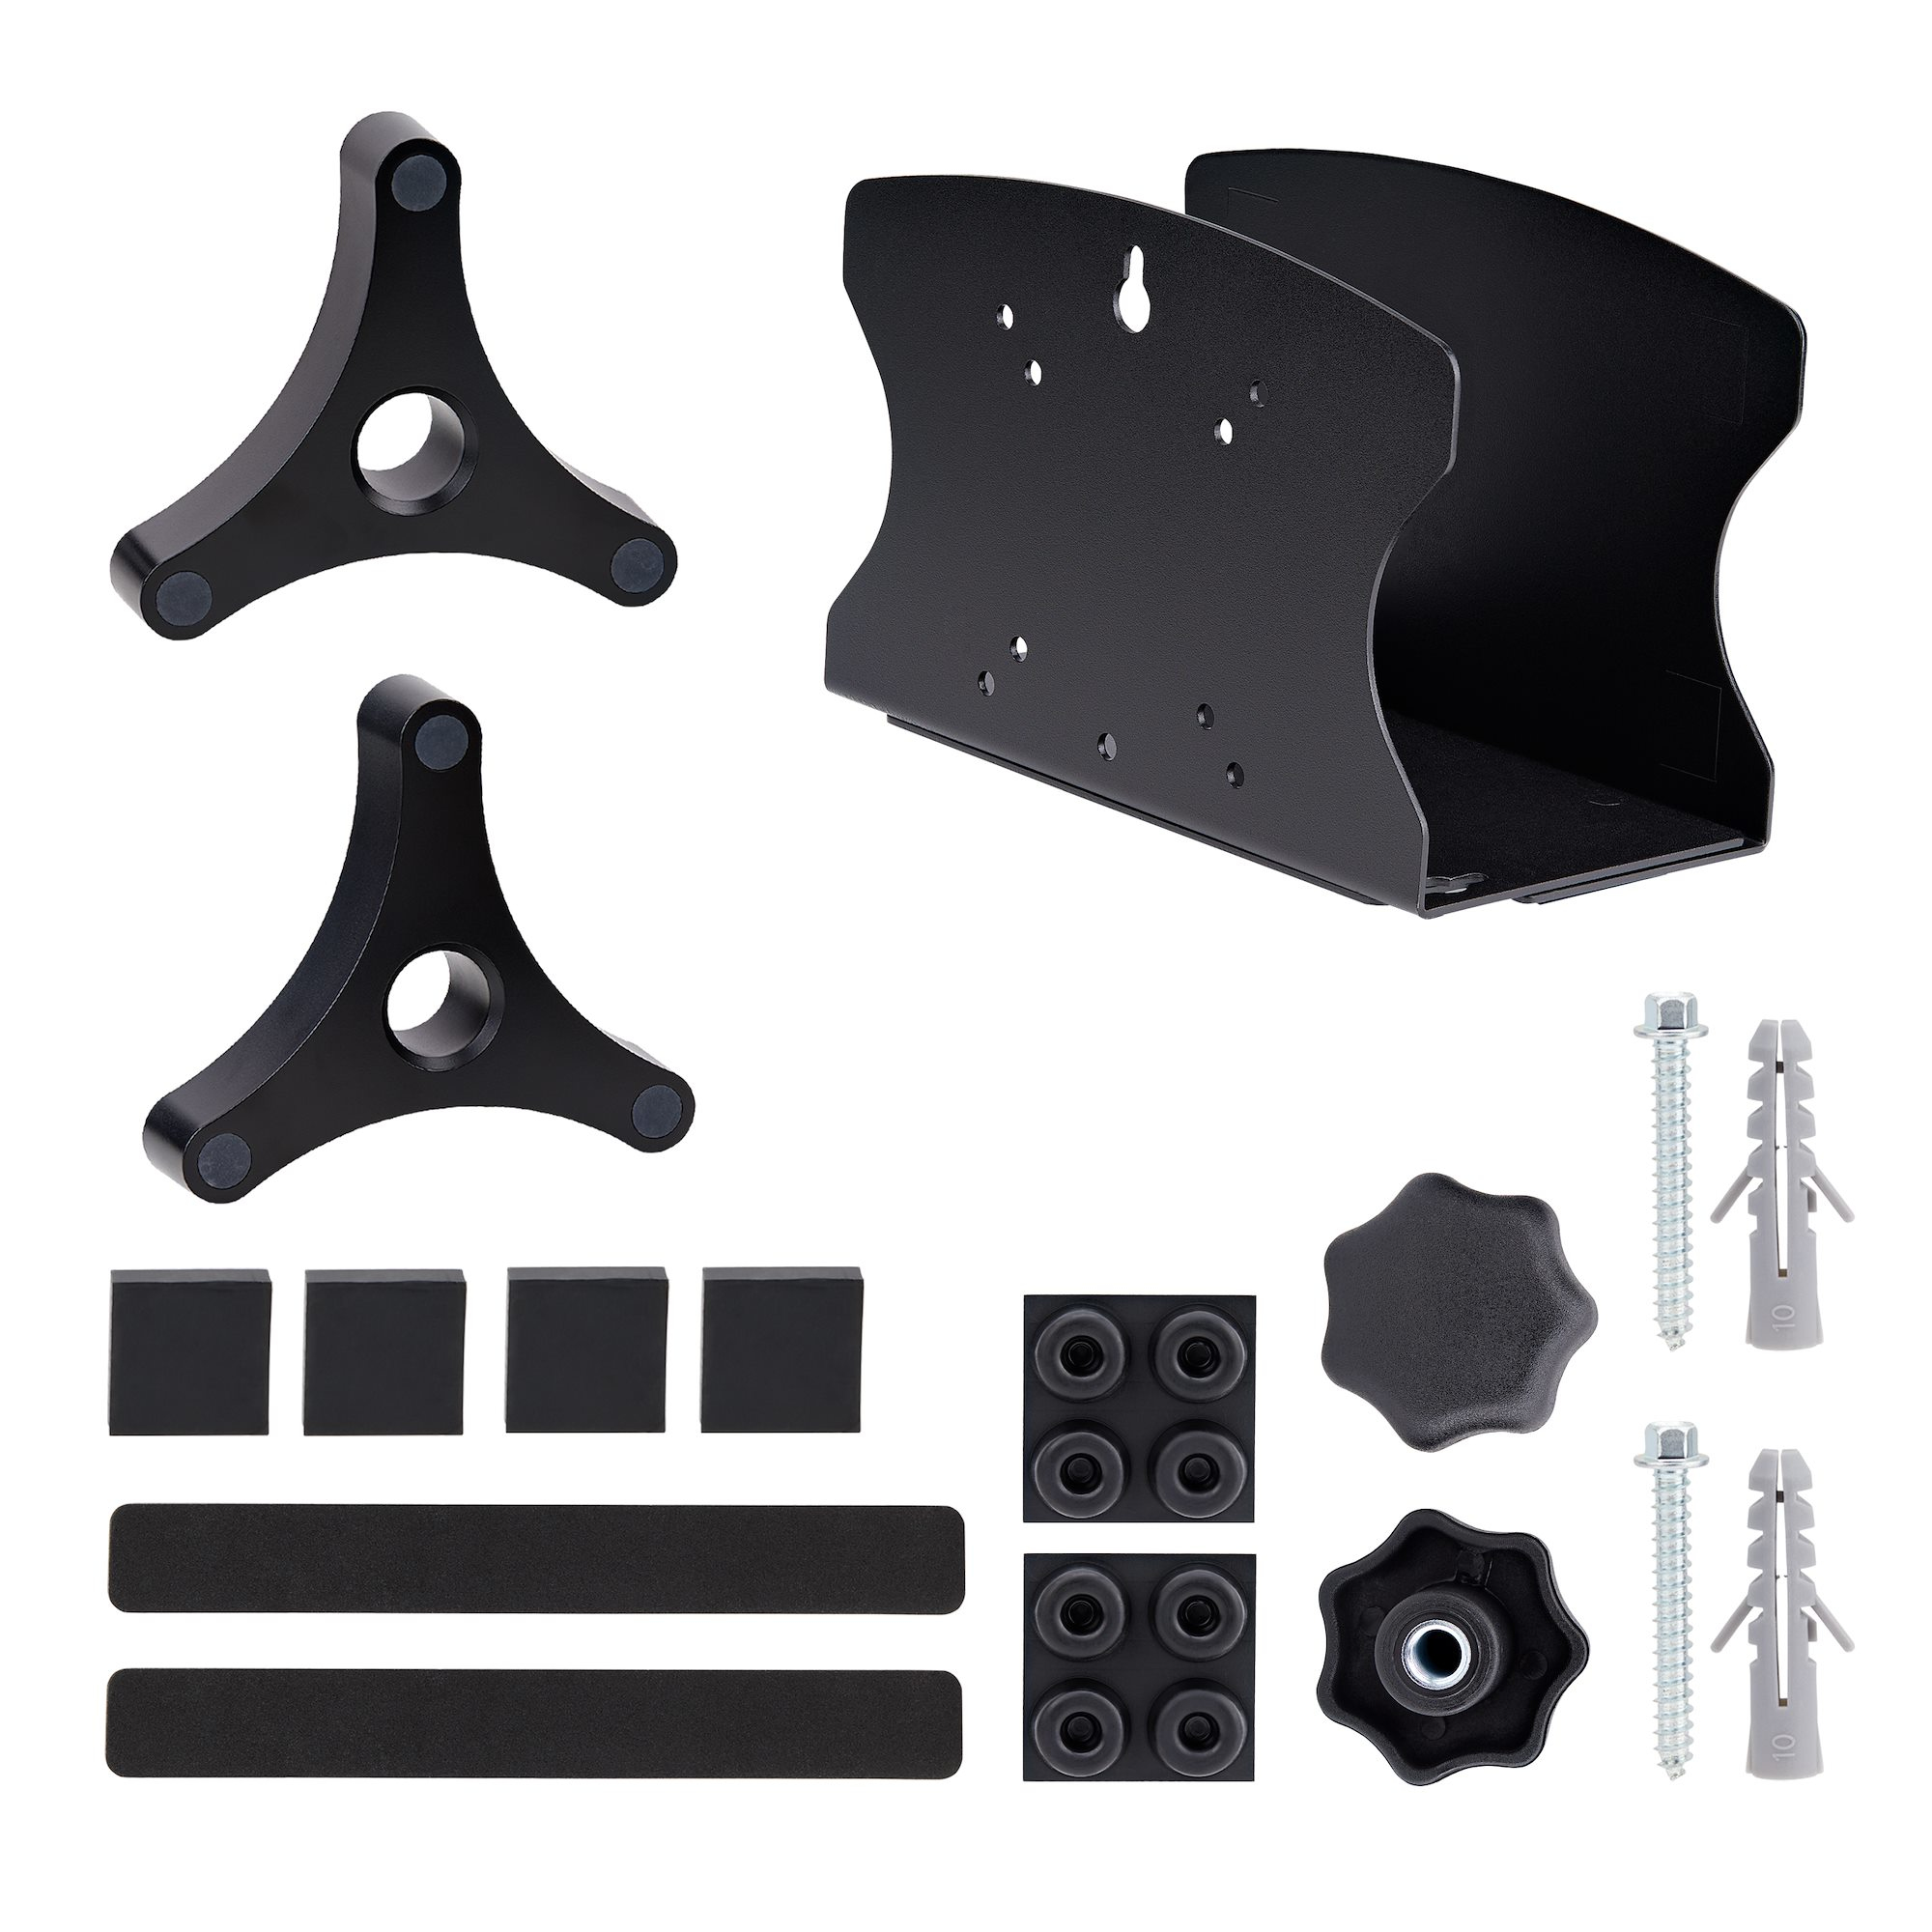 StarTech.com PC Wall Mount Bracket, Supports Desktop Computers Up To 40lb (18kg), Tool-Less Adjustments 1.9-7.8in (50-200mm), Heavy-Duty Wall Mount Shelf/Holder for PC Case/Tower